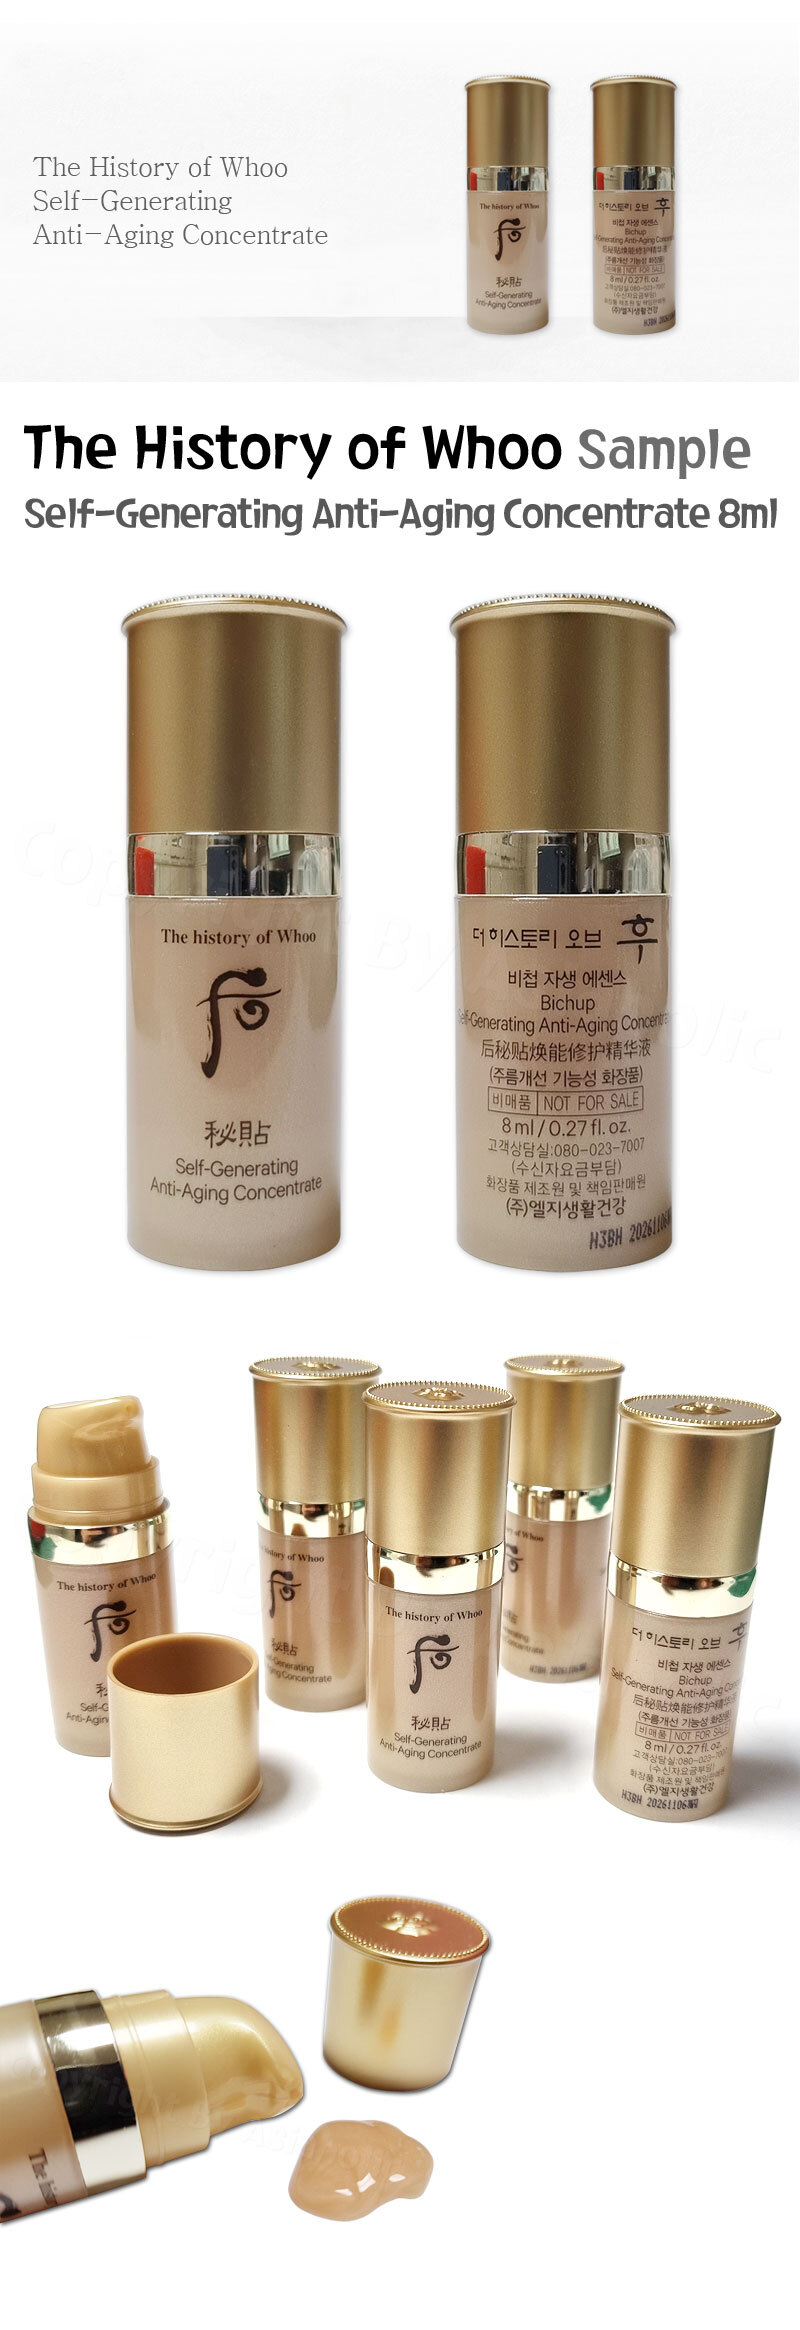 The history of Whoo Self-Generating Anti-Aging Concentrate 8ml x 3pcs (24ml) Sample Newest Newest Version